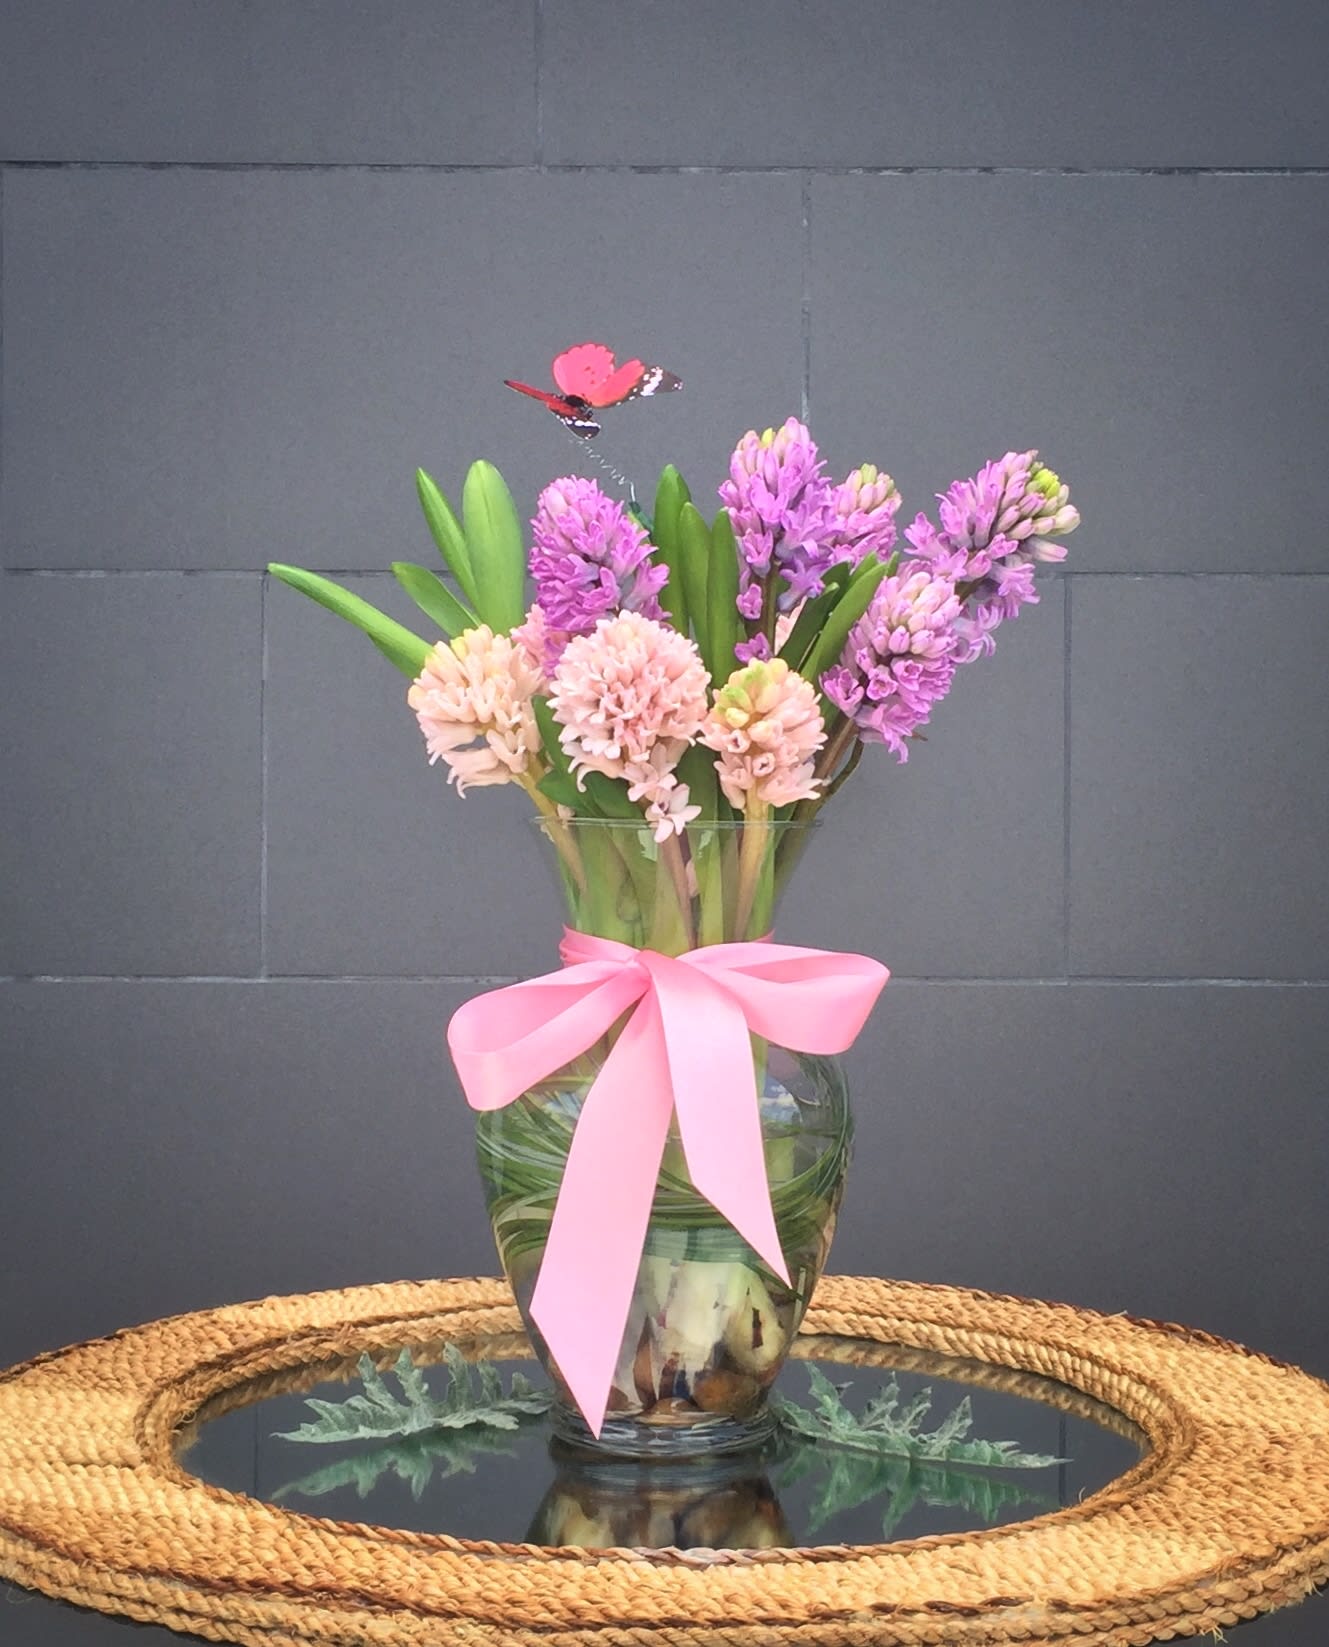 Fragrant Spring - Lovely design including fragrant hyacinths and accents in a glass vase.